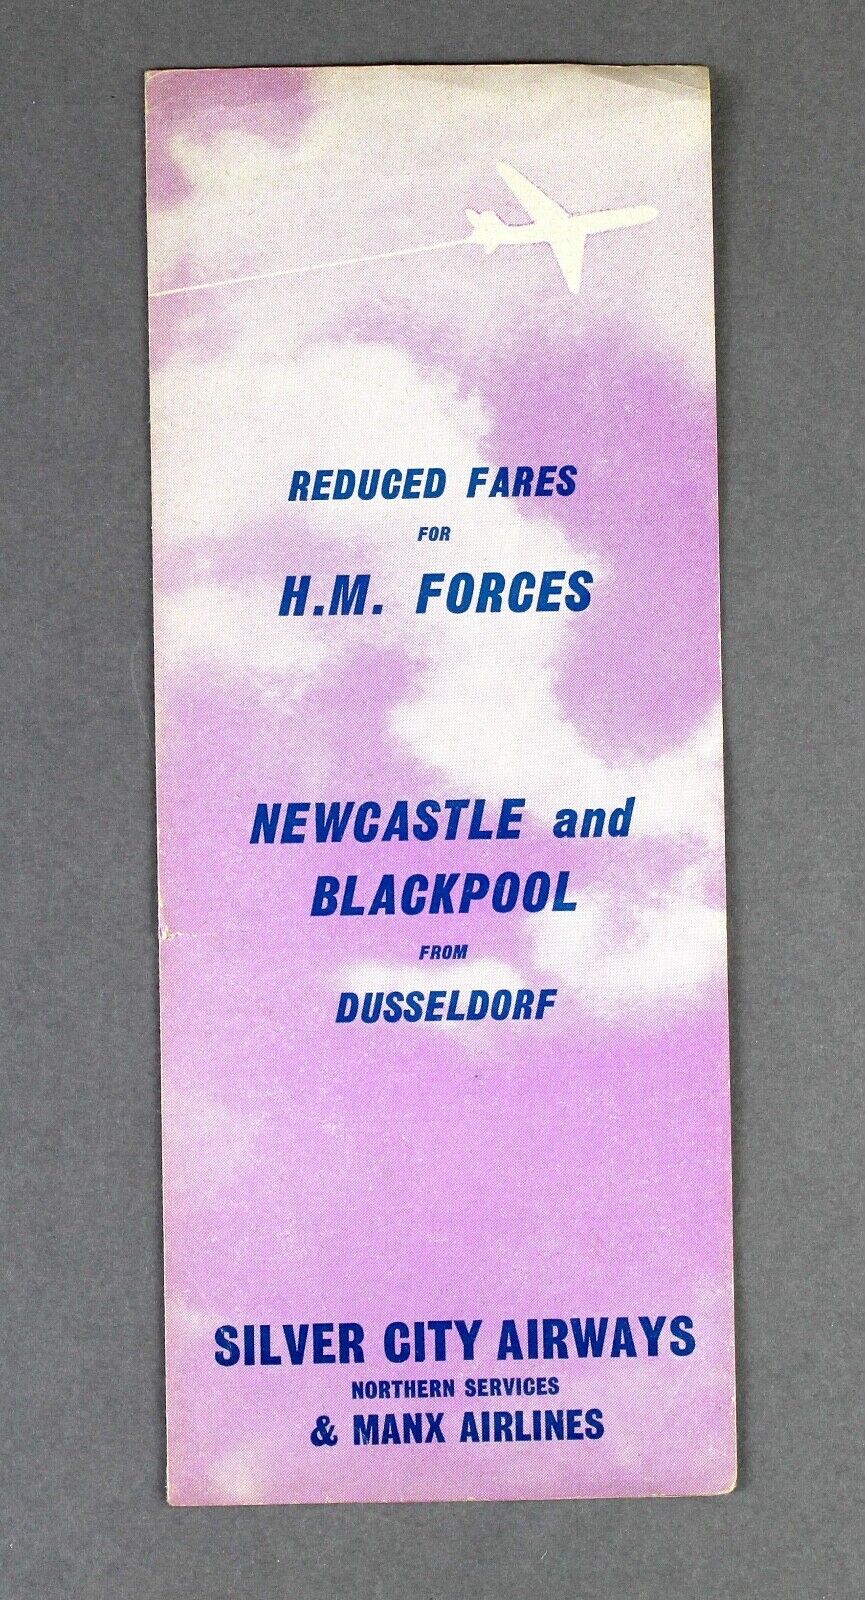 SILVER CITY & MANX AIRLINES TIMETABLE NEWCASTLE BLACKPOOL DUSSELDORF    